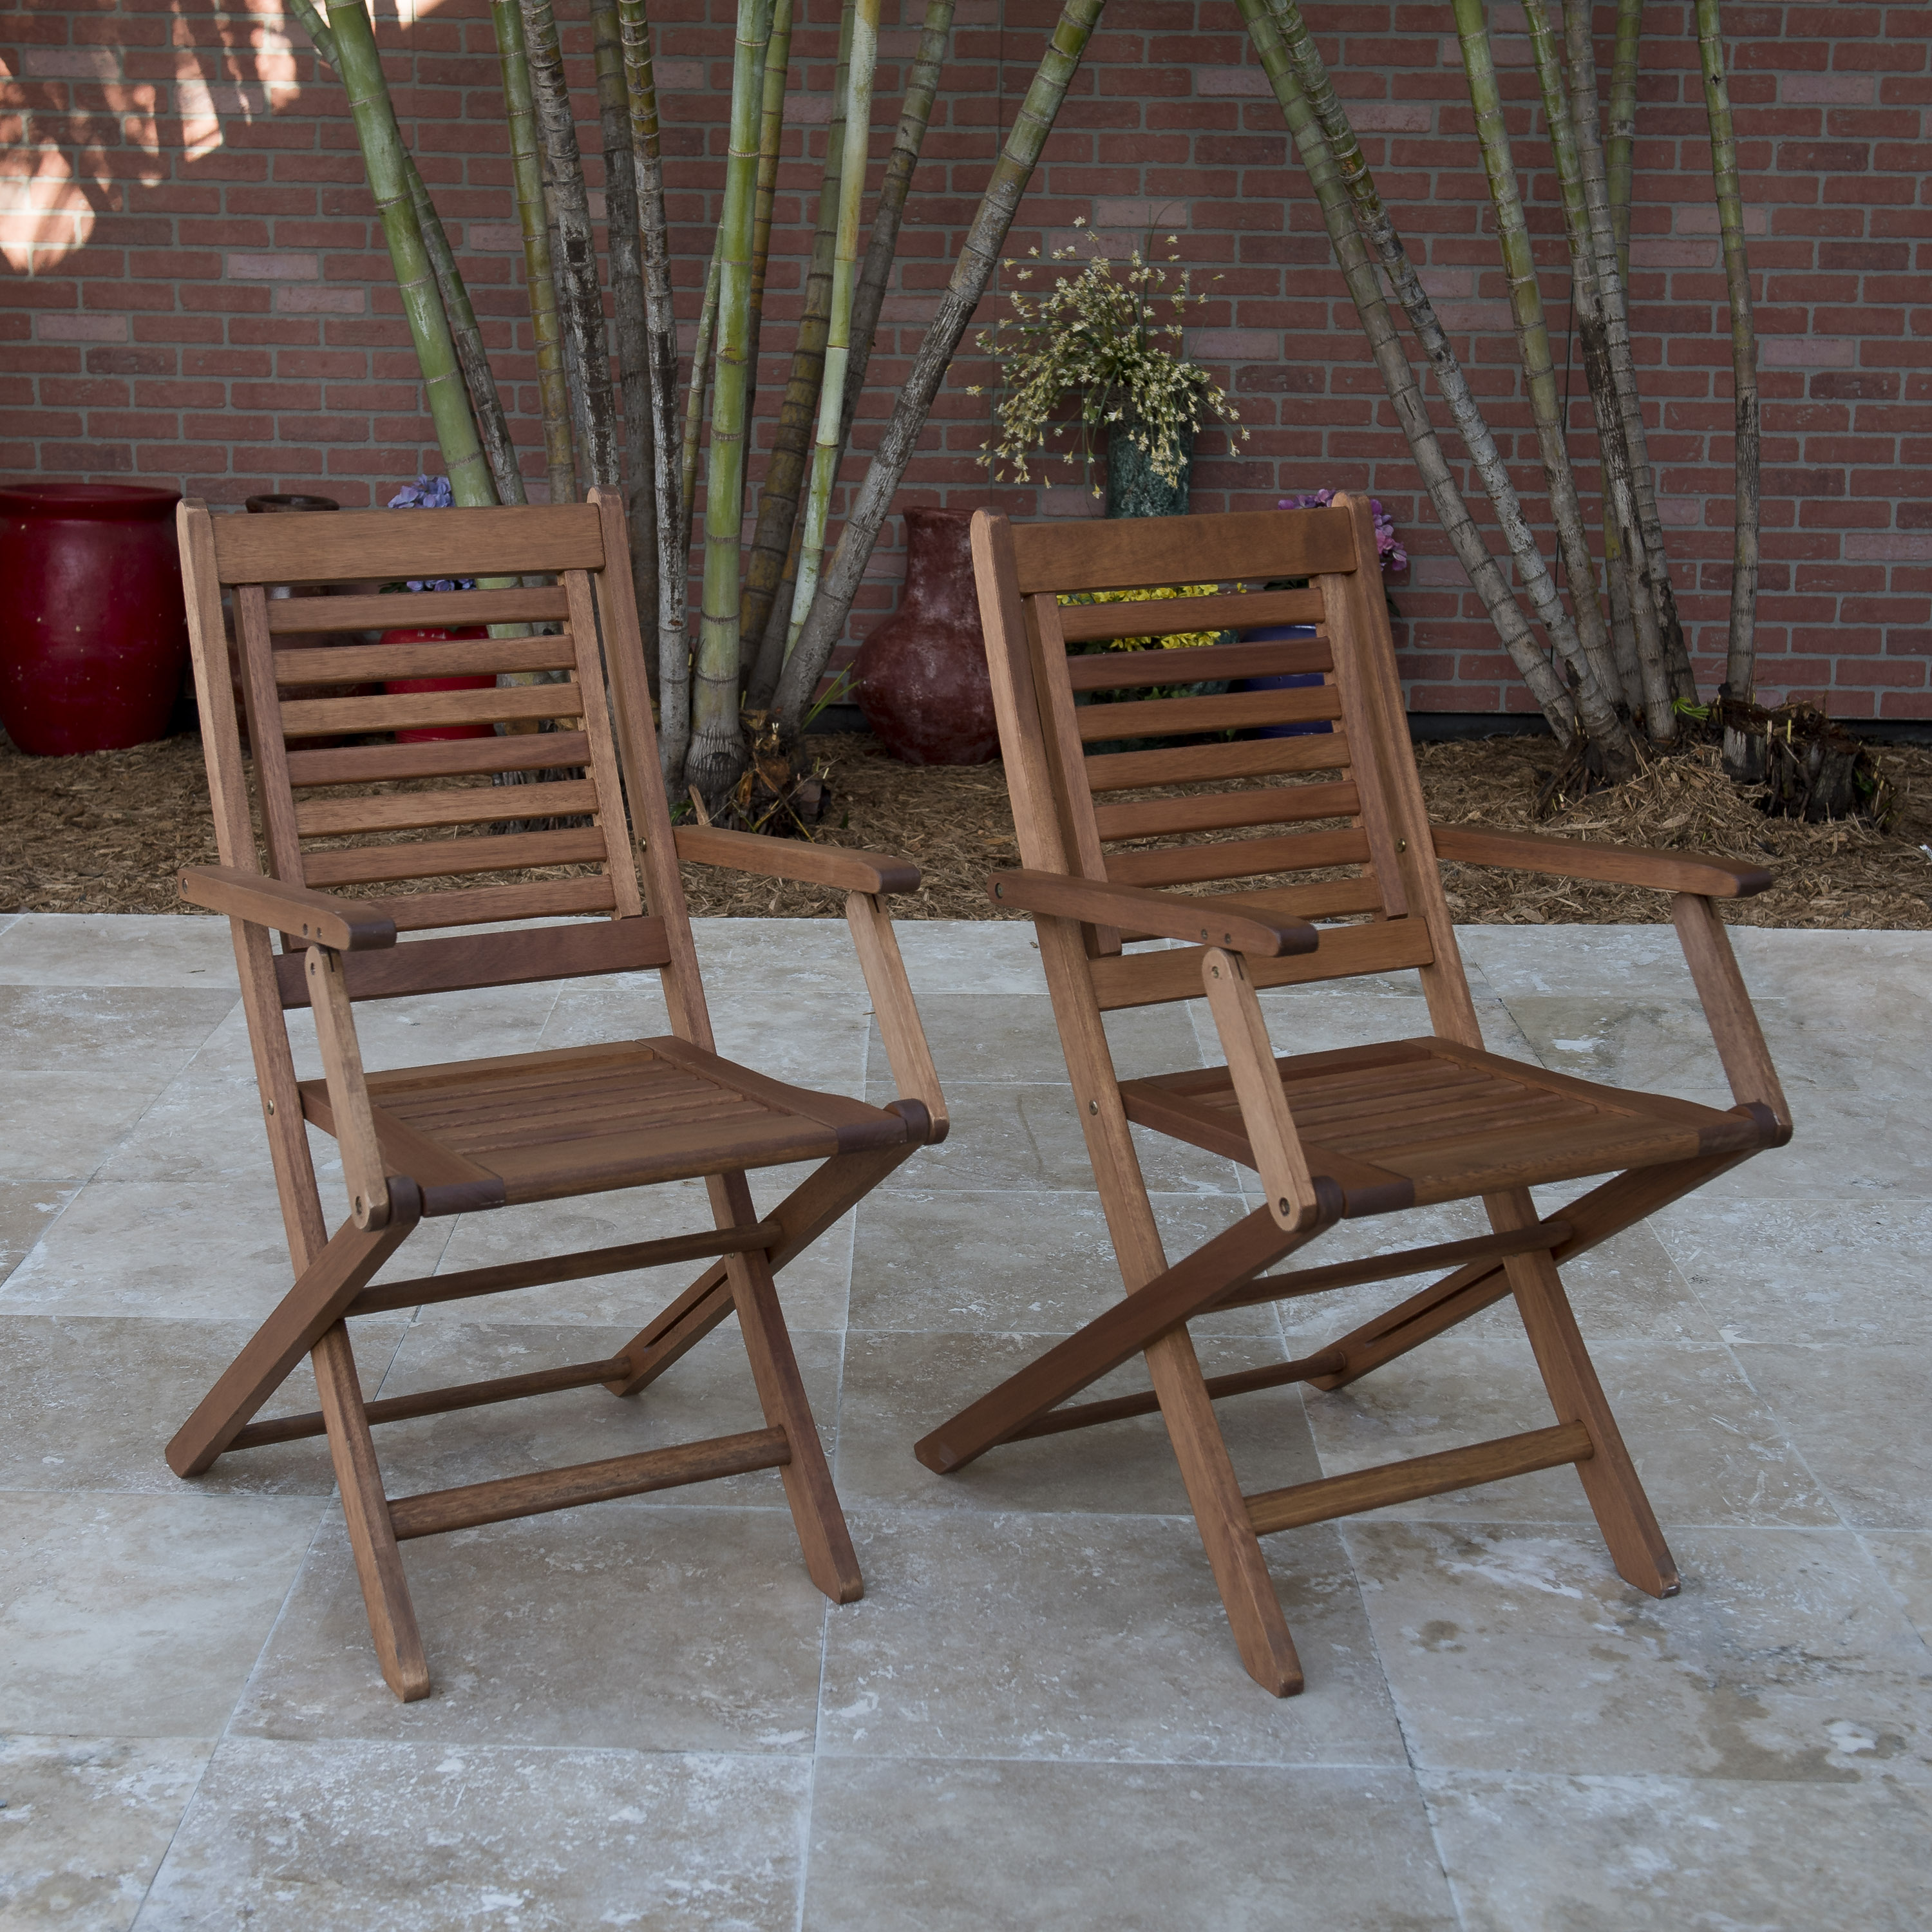 Amazonia Milano 2 Pieces Folding Armchairs | Eucalyptus Wood | Ideal for Outdoors and Indoors, Brown - image 4 of 5